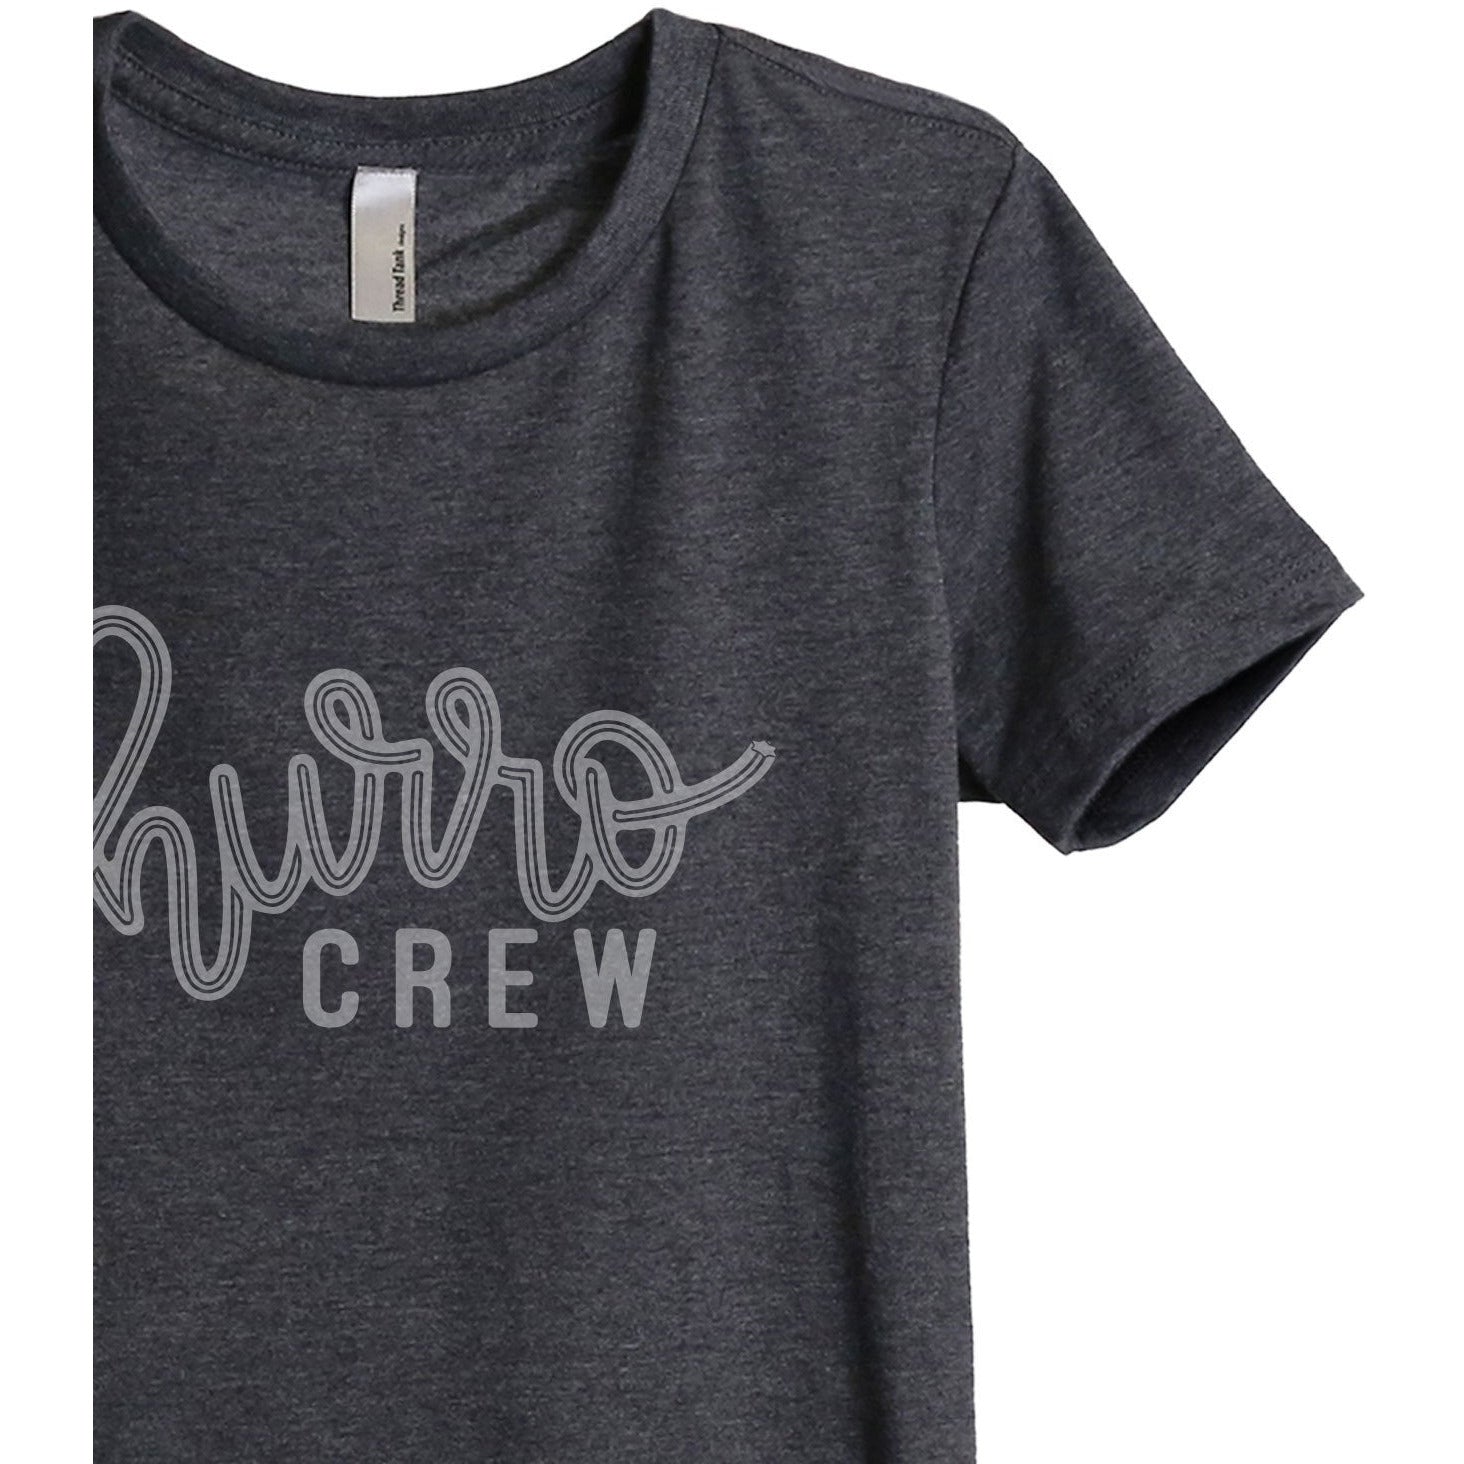 Churro Crew Women's Relaxed Crewneck T-Shirt Top Tee Charcoal Grey Zoom Details